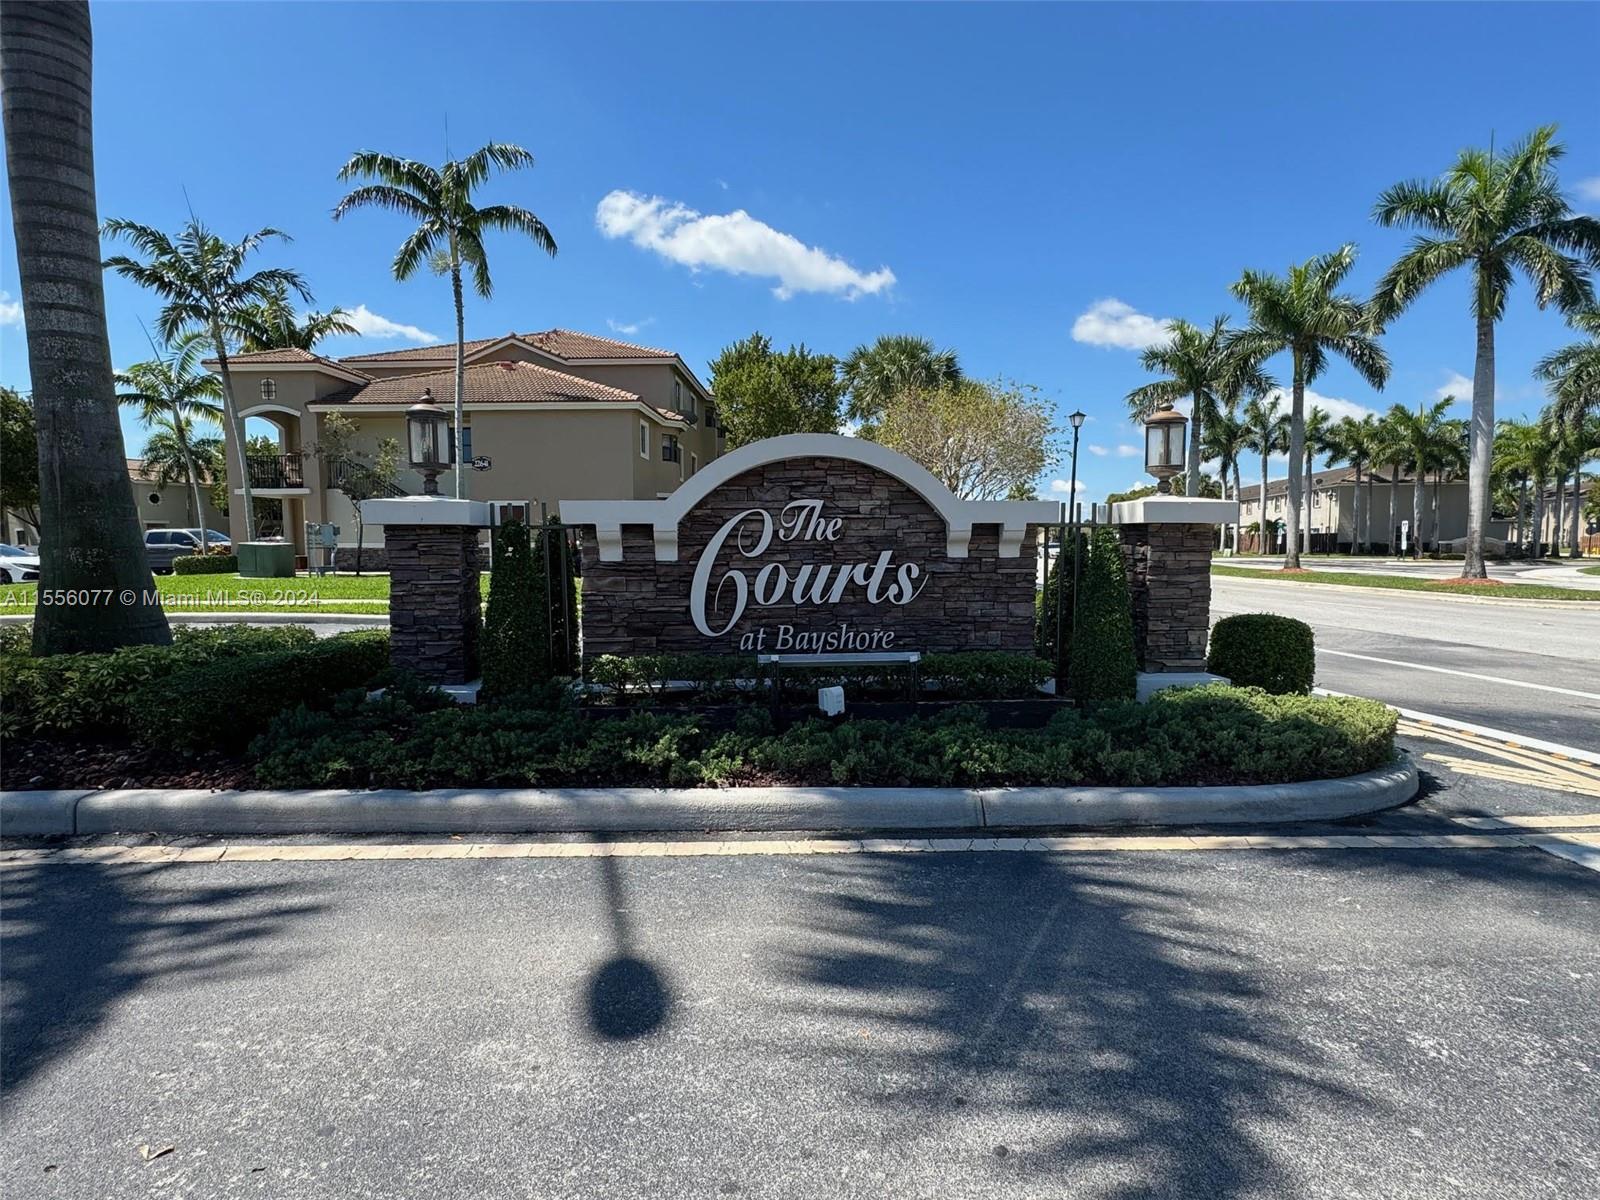 Completely remodeled Corner Unit Townhouse in the quiet and peaceful community of The Courts at Bayshore in Cutler Bay. Property boast porcelain tile throughout, recessed lighting, custom made closets, All bathrooms have been tastefully remodeled, wooden staircase, too many improvements to name. Two associations - HOA is $ 292.95 monthly and the Master HOA is $ 83.00 a month. Property is owner Occupied, please contact listing agent 24 hours in advance for Showings. Ensure to provide Pre-approval letter, DU and proof all in one pdf file along with AS IS contract and required addendums.